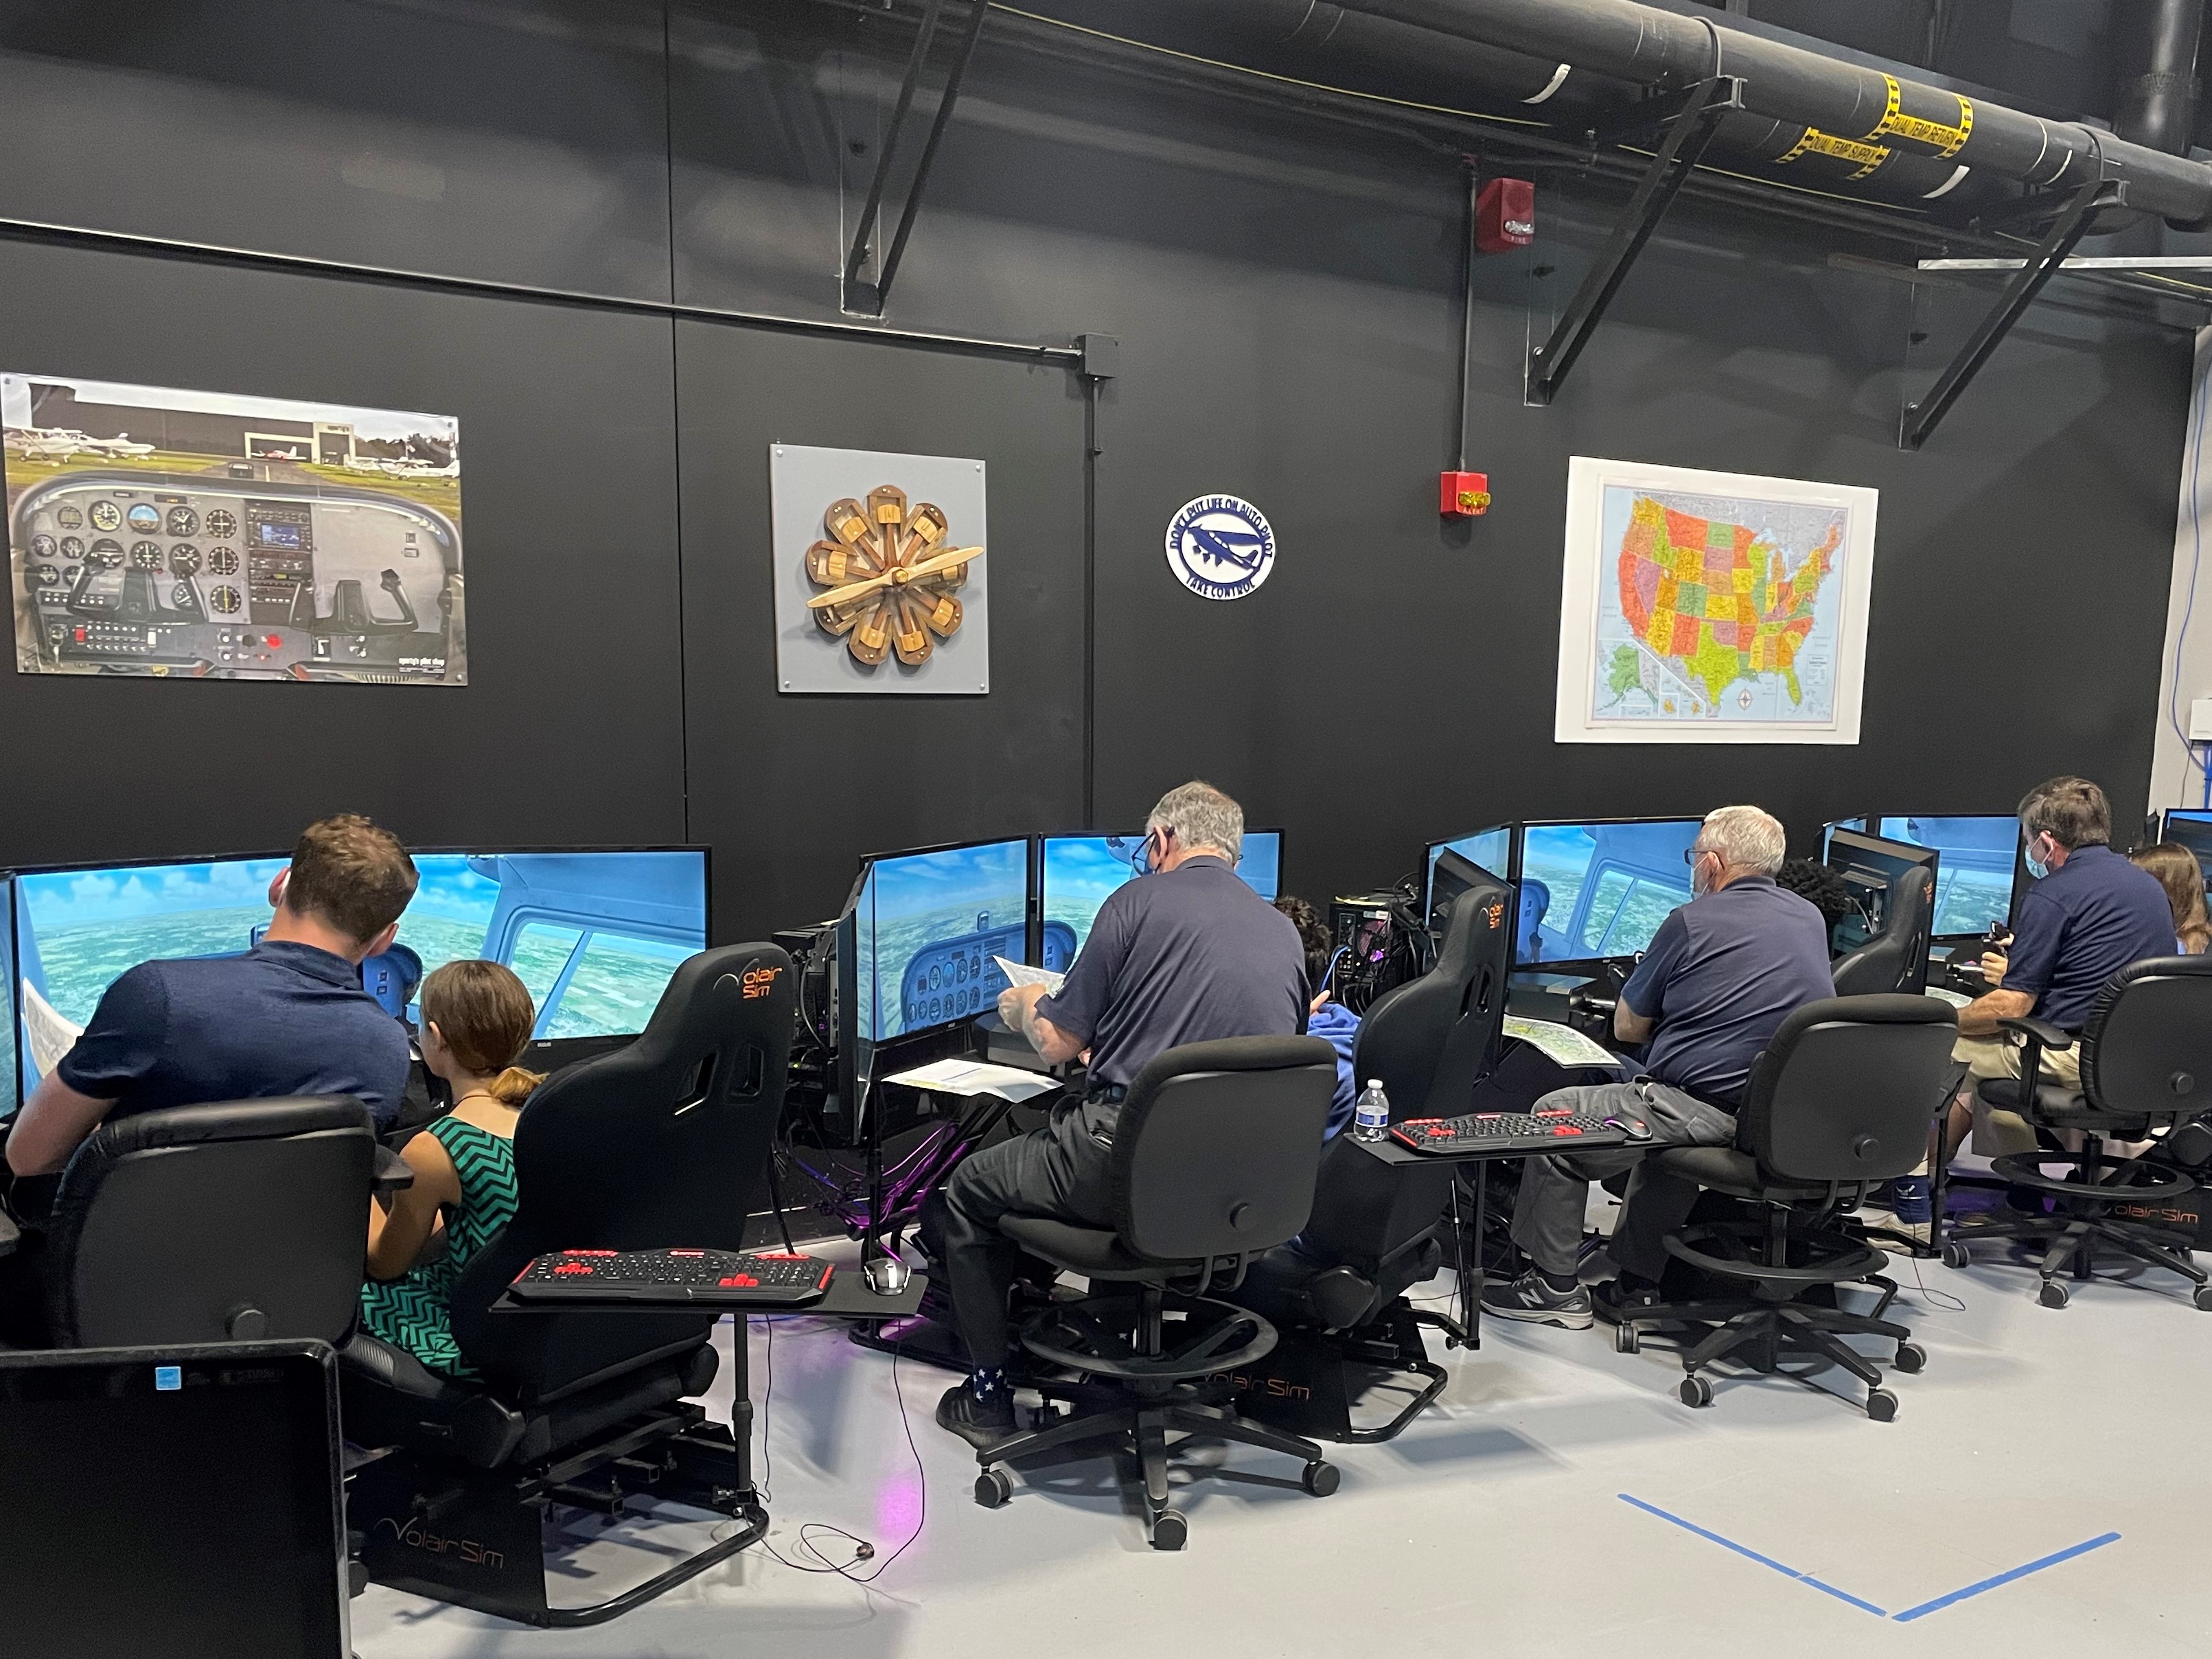 Image of Intro to Pilot course participants and instructors from behind as they look at the monitors showing their flight simulations.